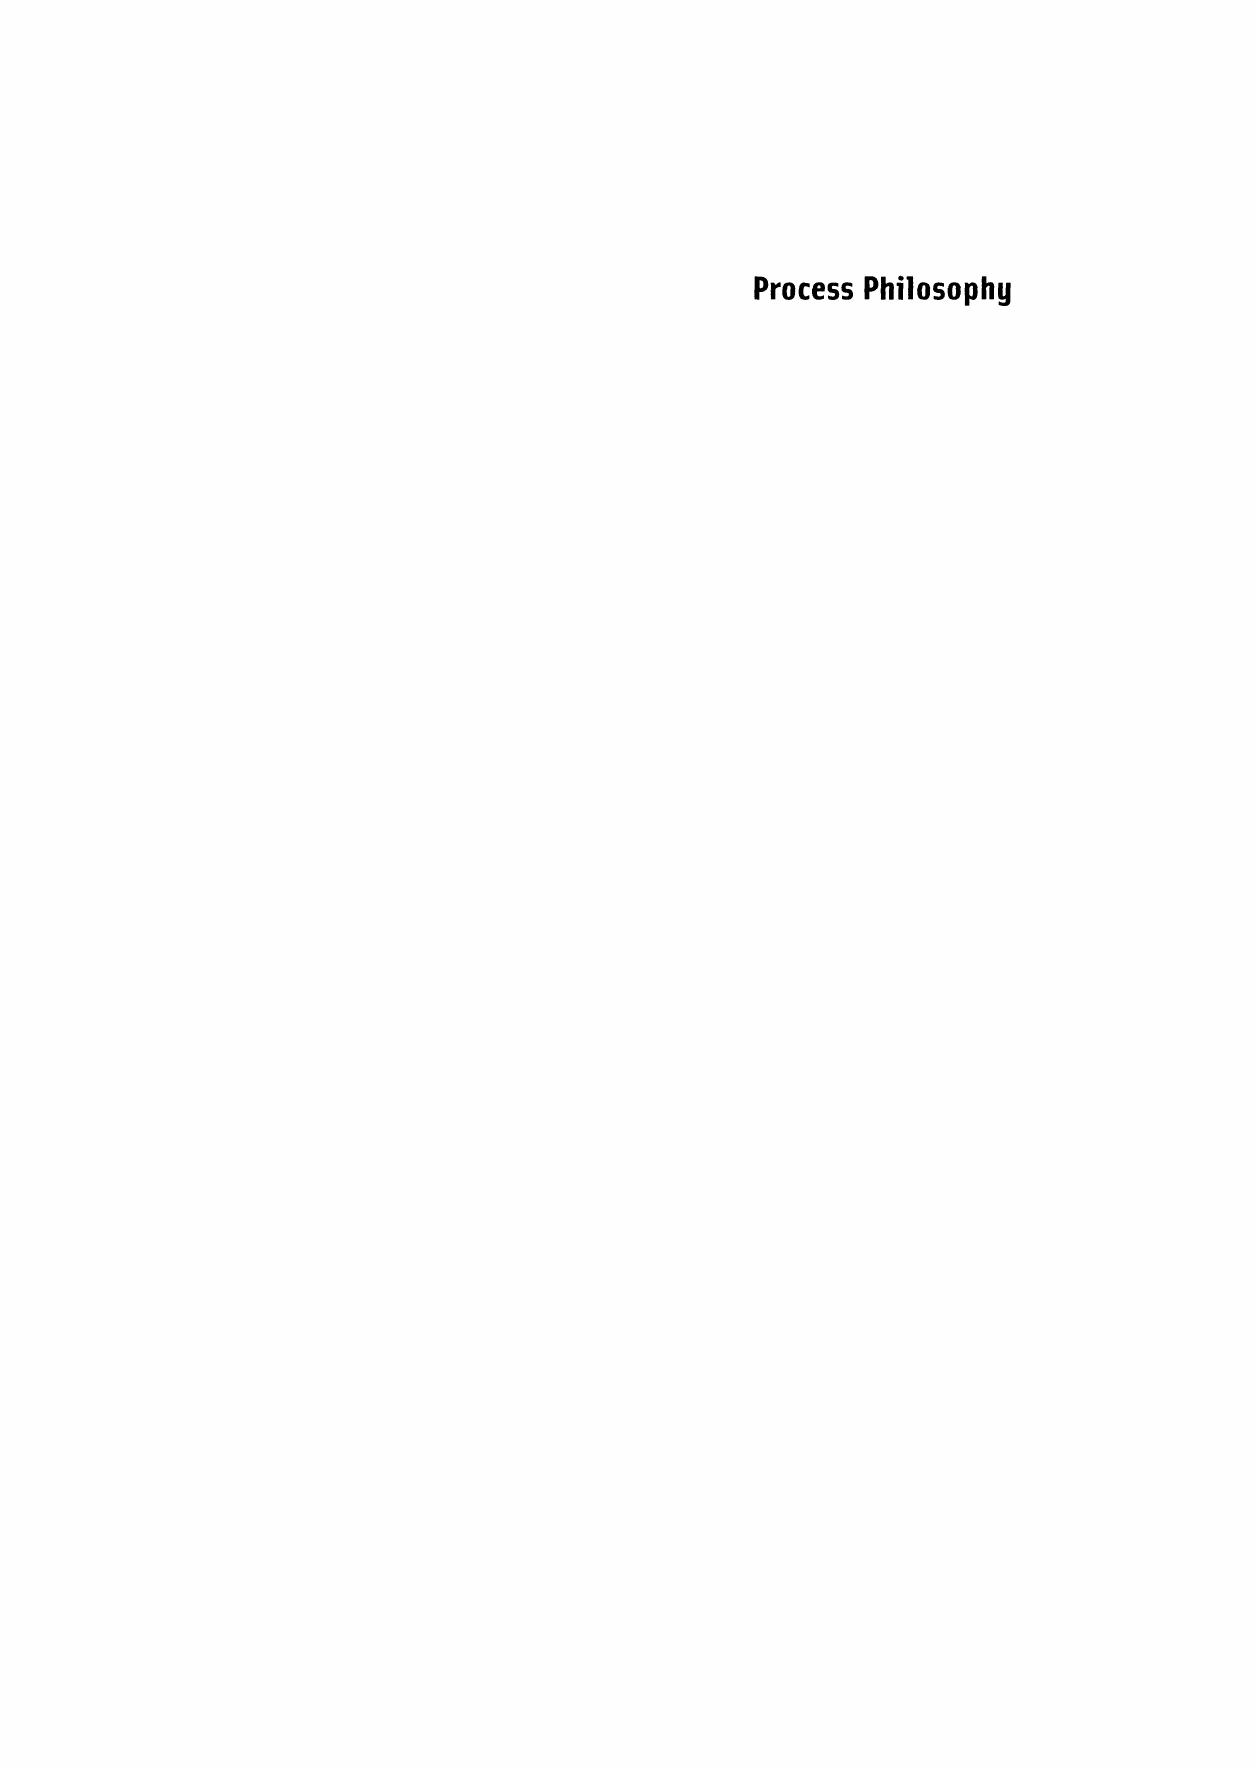 Process Philosophy A Survey of Basic Issues by Nicholas Rescher 2010